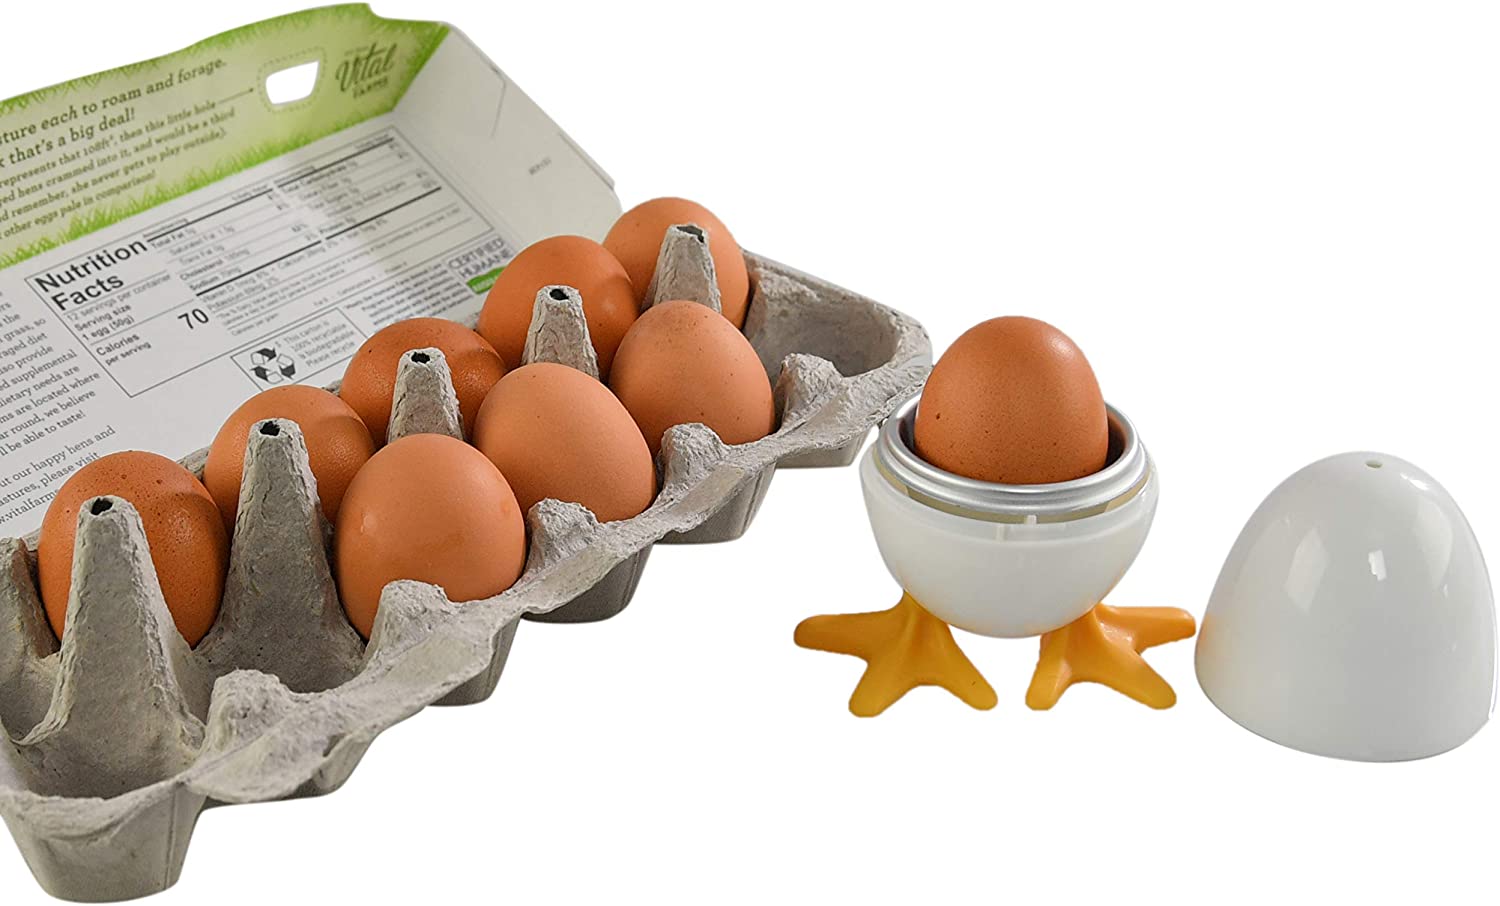 Home-X Microwave Egg Cooker with Splash Guard and Feet